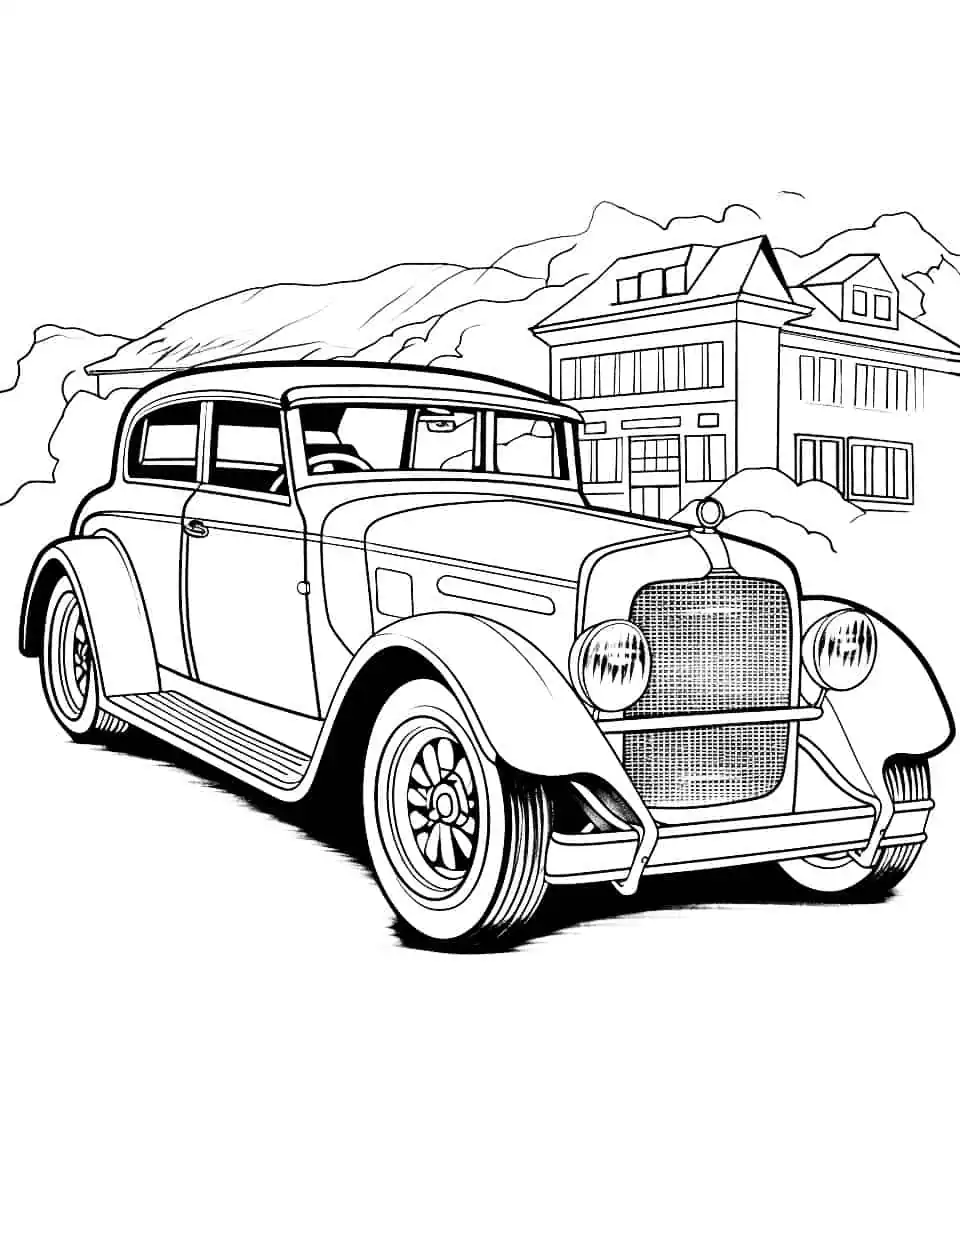 Detailed Vintage Car Coloring Page - A detailed vintage car for those who enjoy intricate coloring tasks.